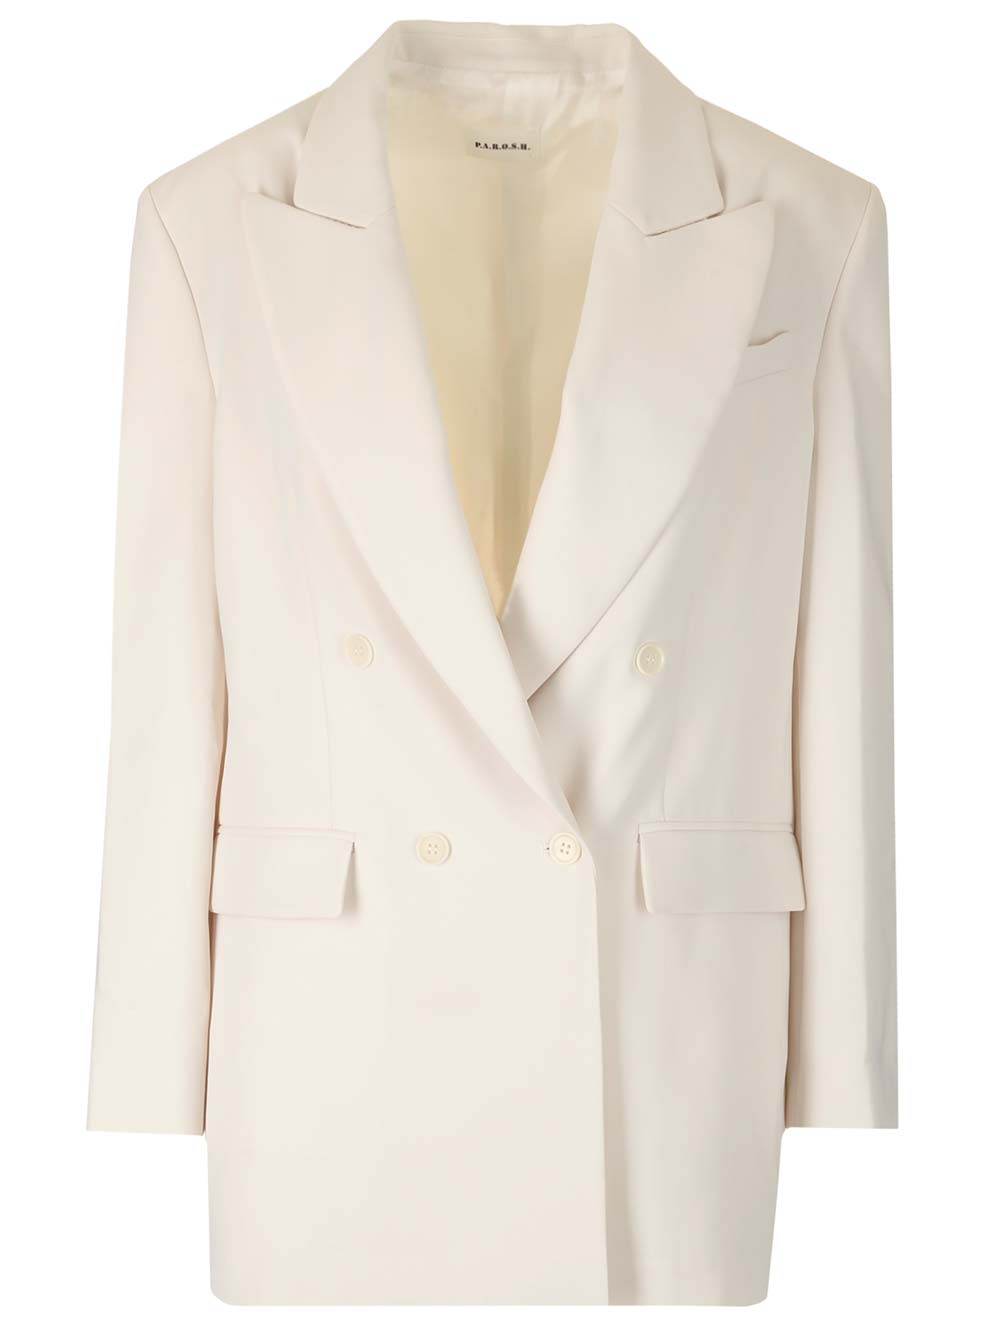 P.A.R.O.S.H WHITE DOUBLE-BREASTED JACKET